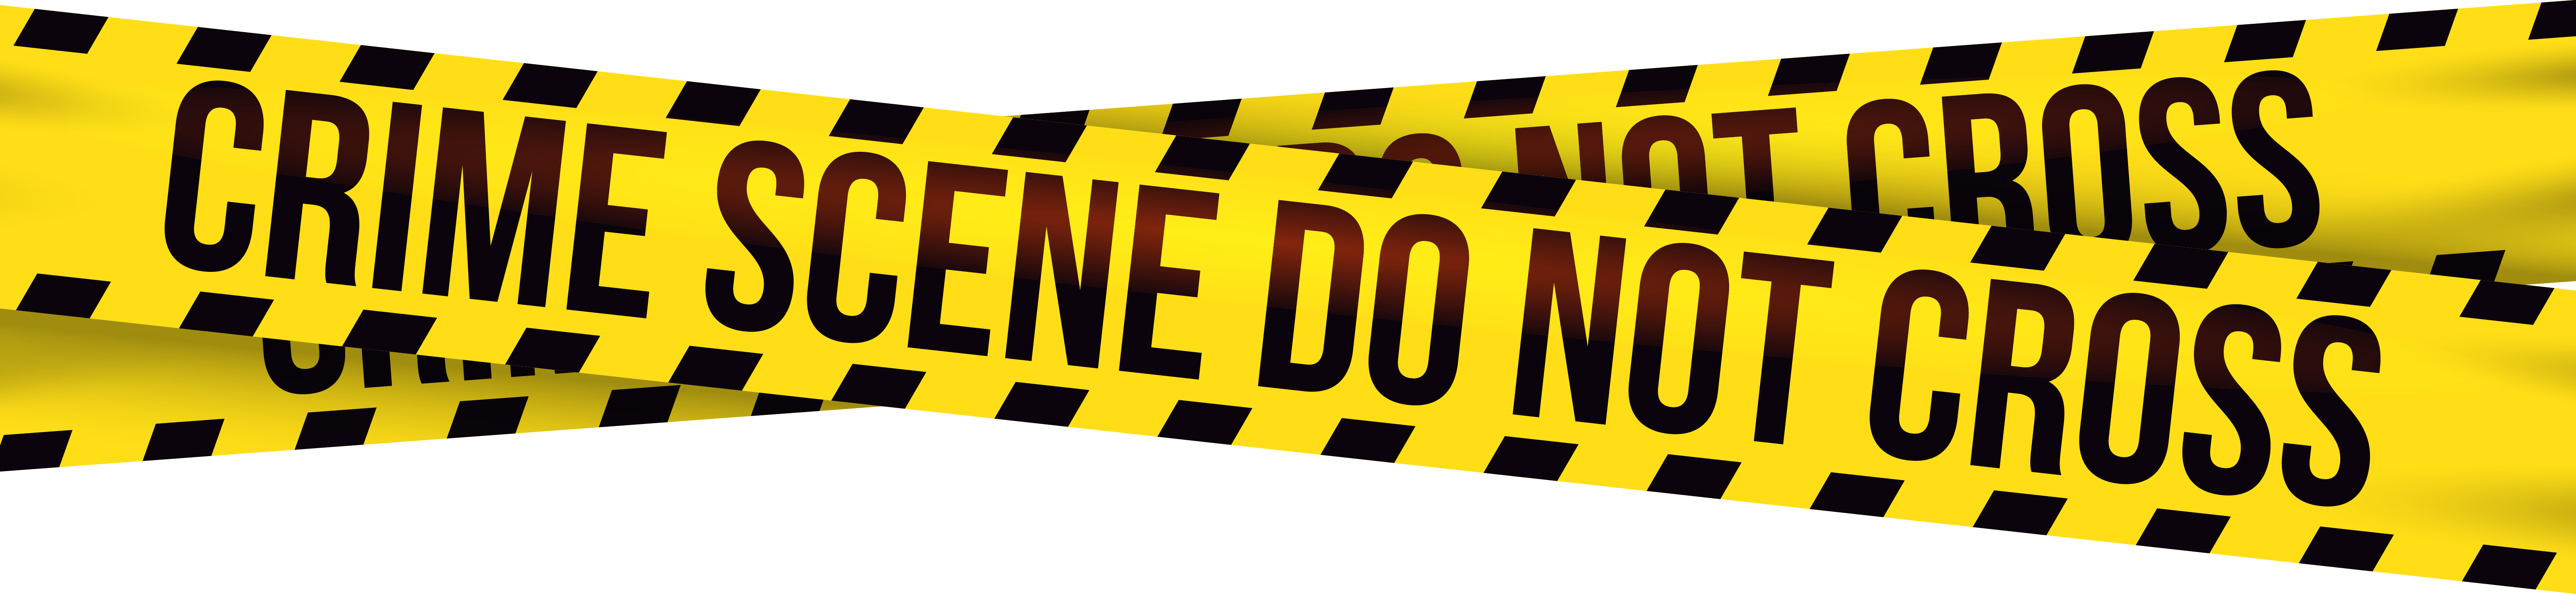 Police Tape PNG Image in Transparent